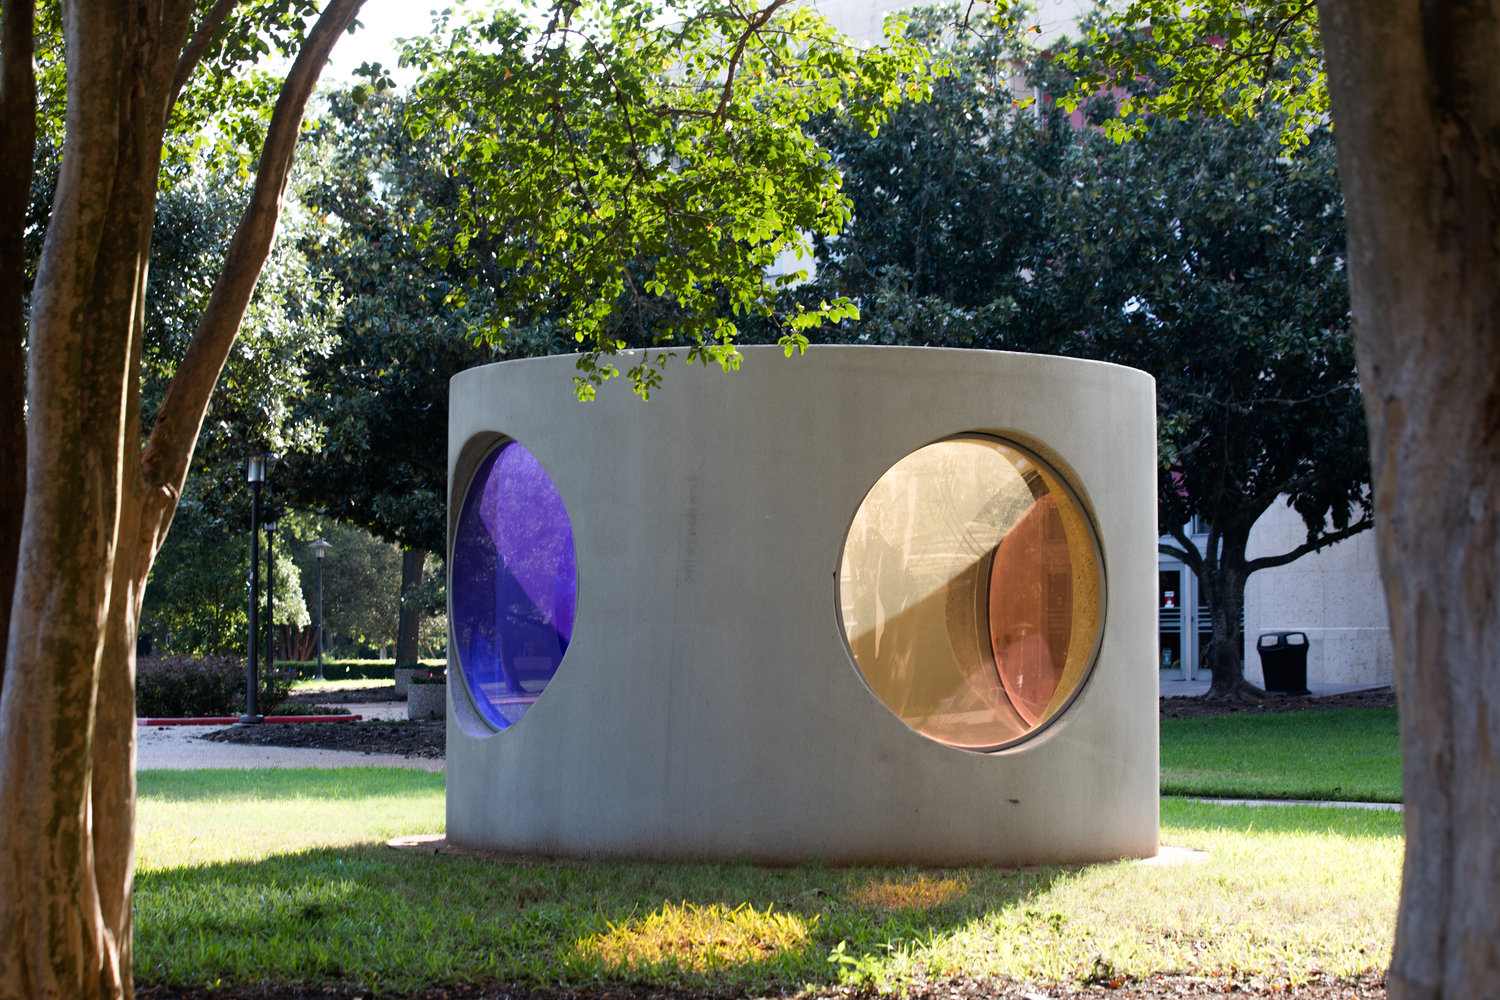 A sculpture called Here by Sarah Braman is currently on loan by the artist to the University of Houston.